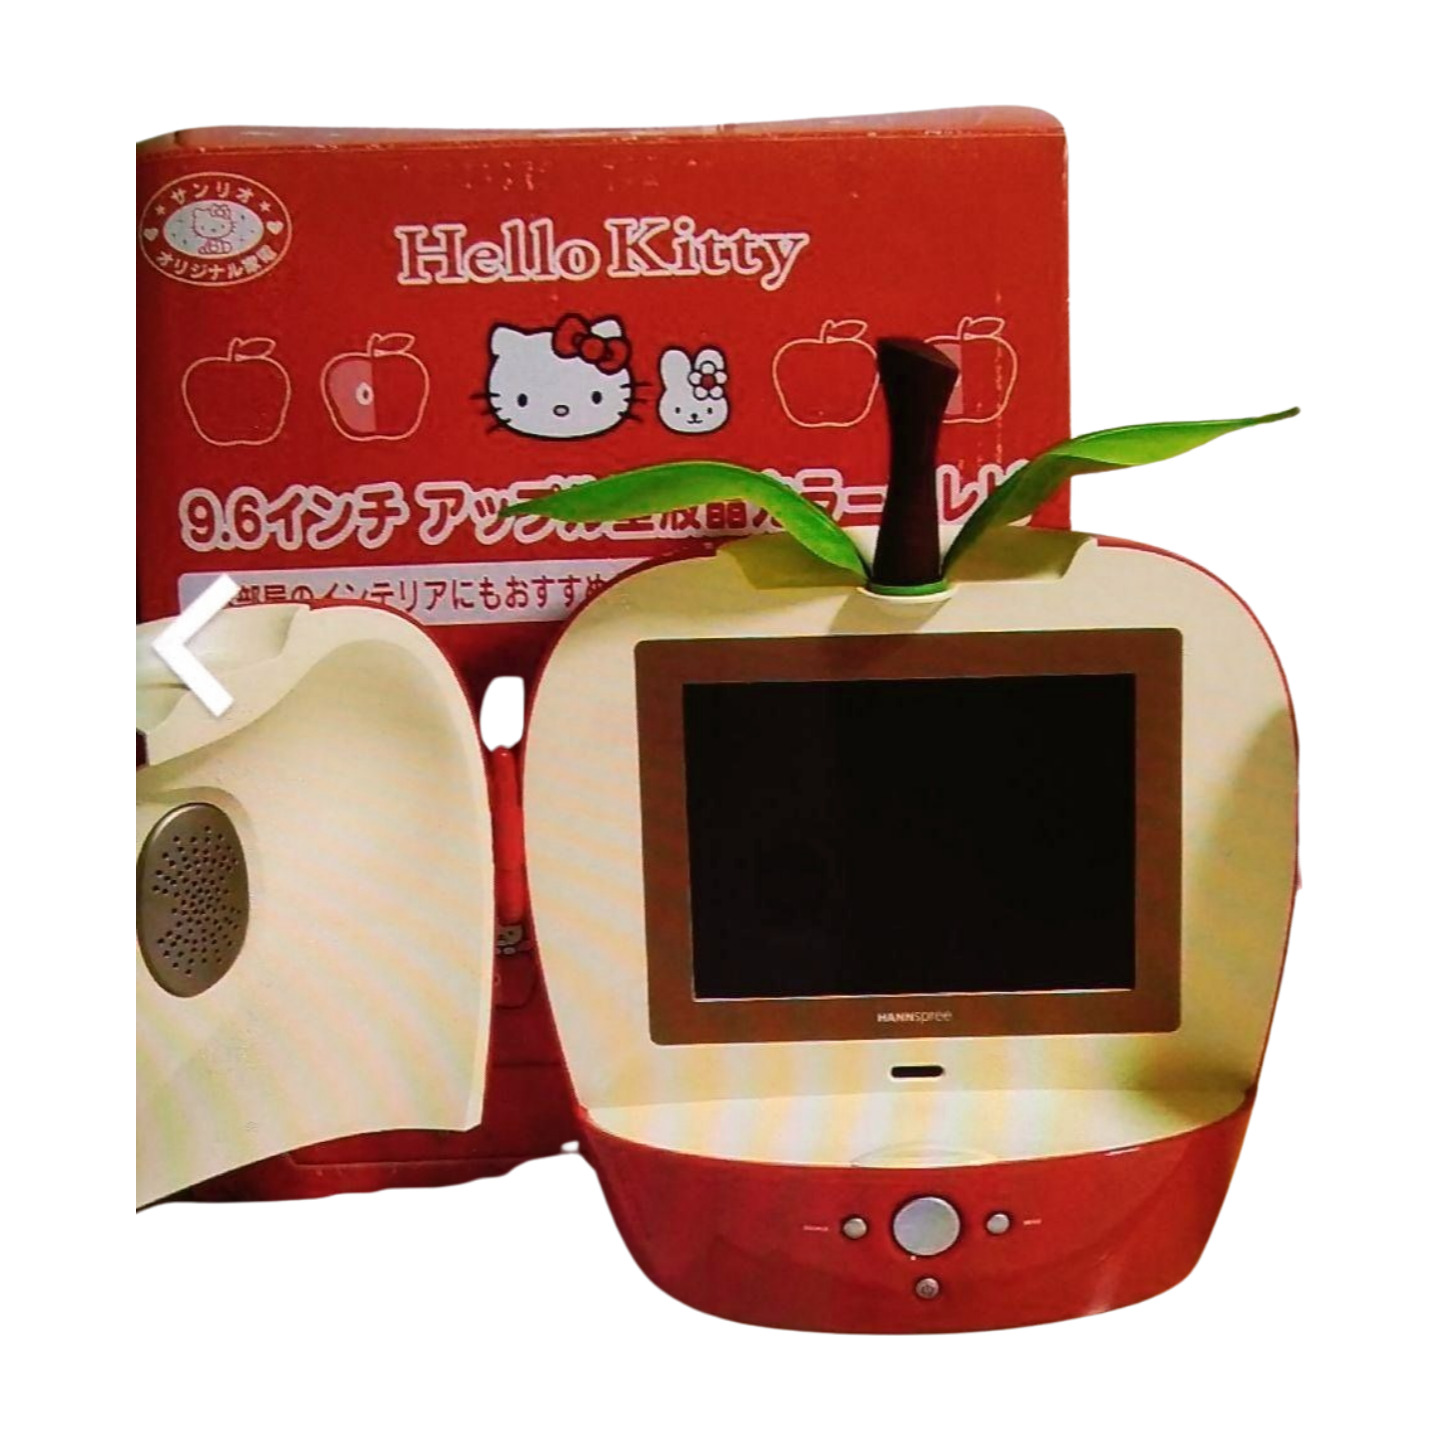 Sanrio Hello Kitty LCD 9.6in Apple-shaped Color TV Red 2006 Vintage Unused